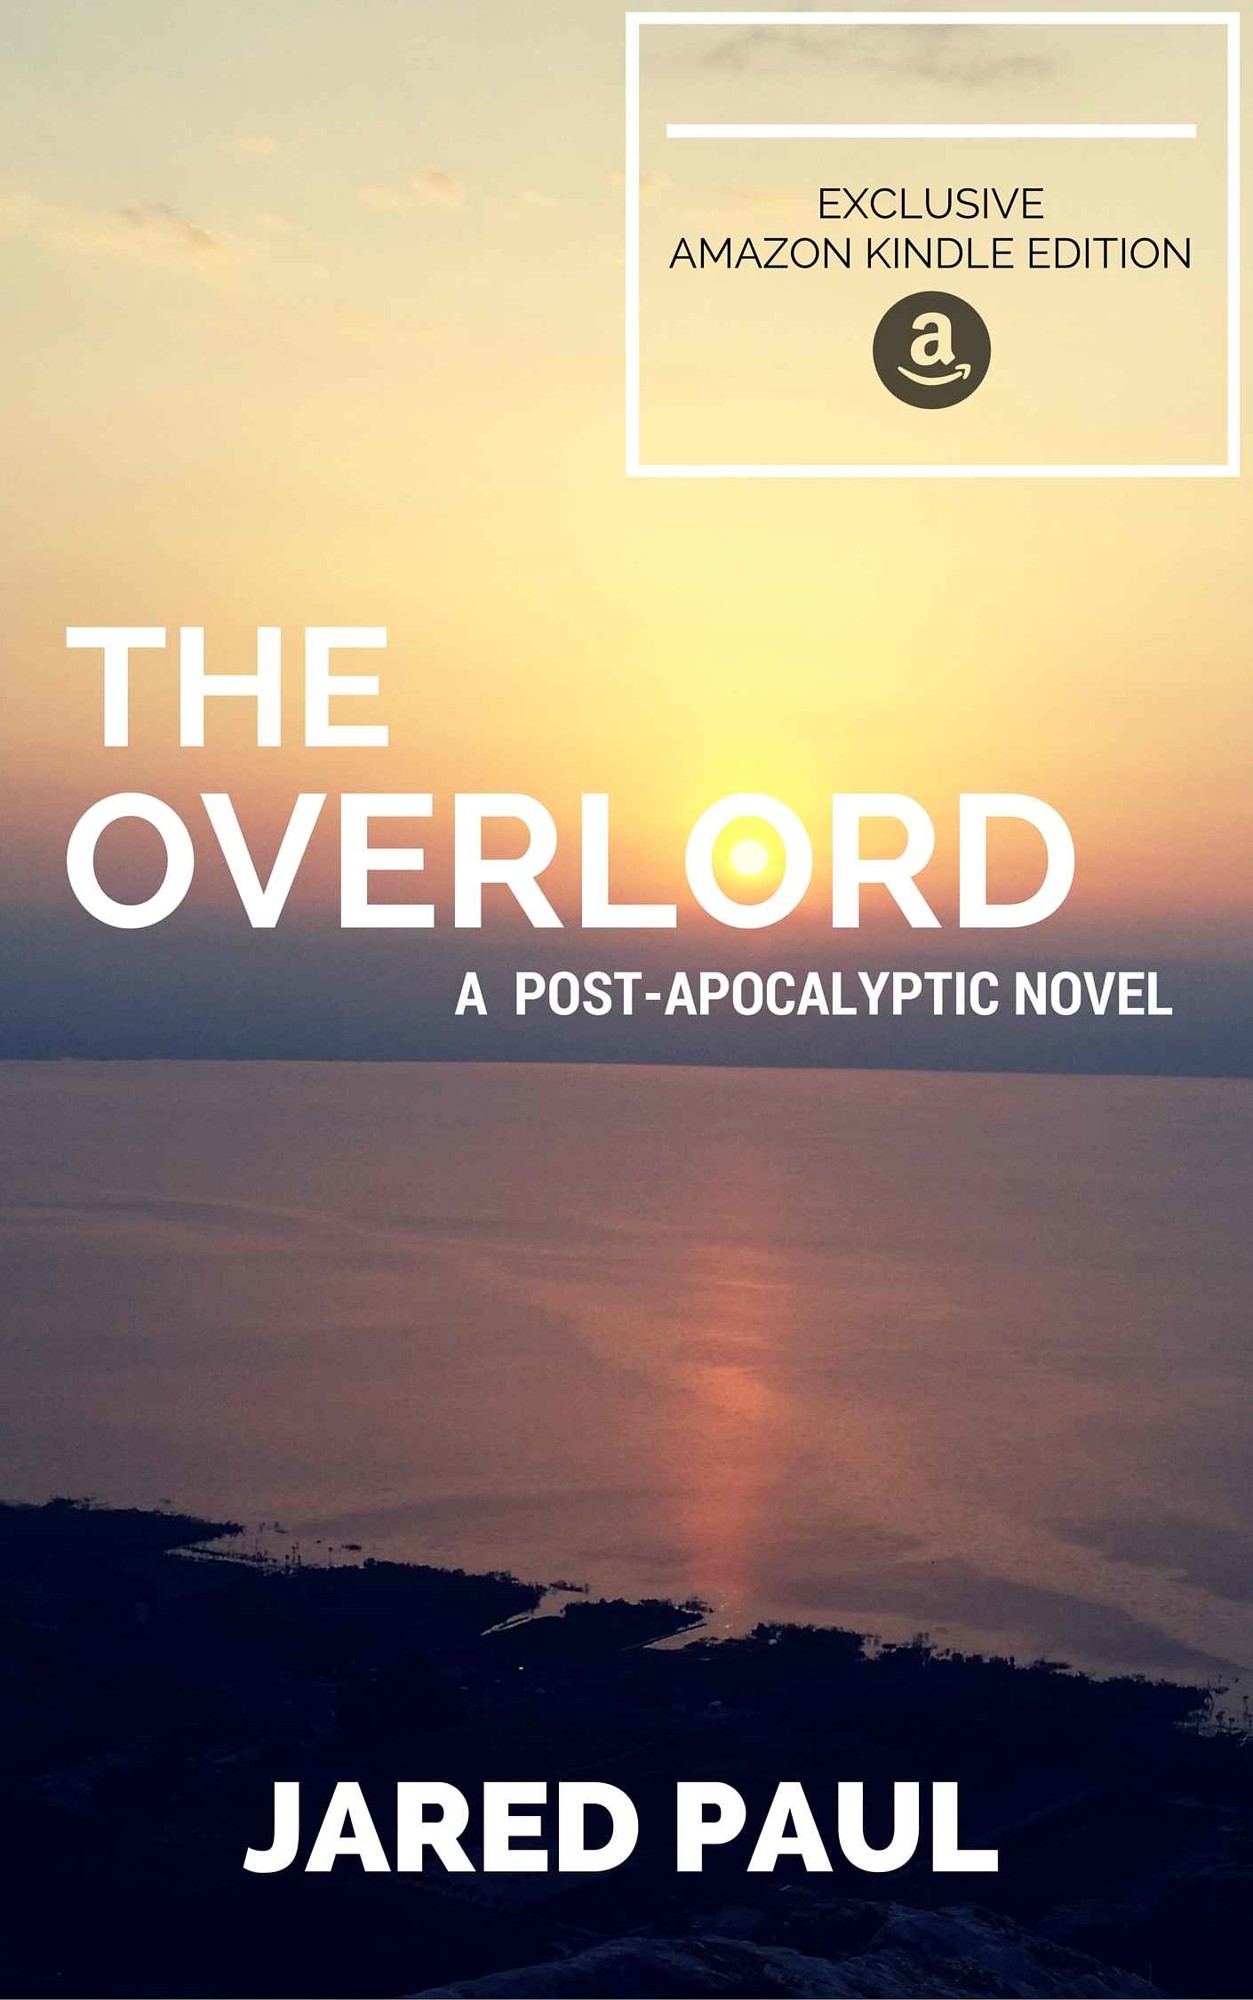 The Overlord: A Post-Apocalyptic Novel by Jared Paul